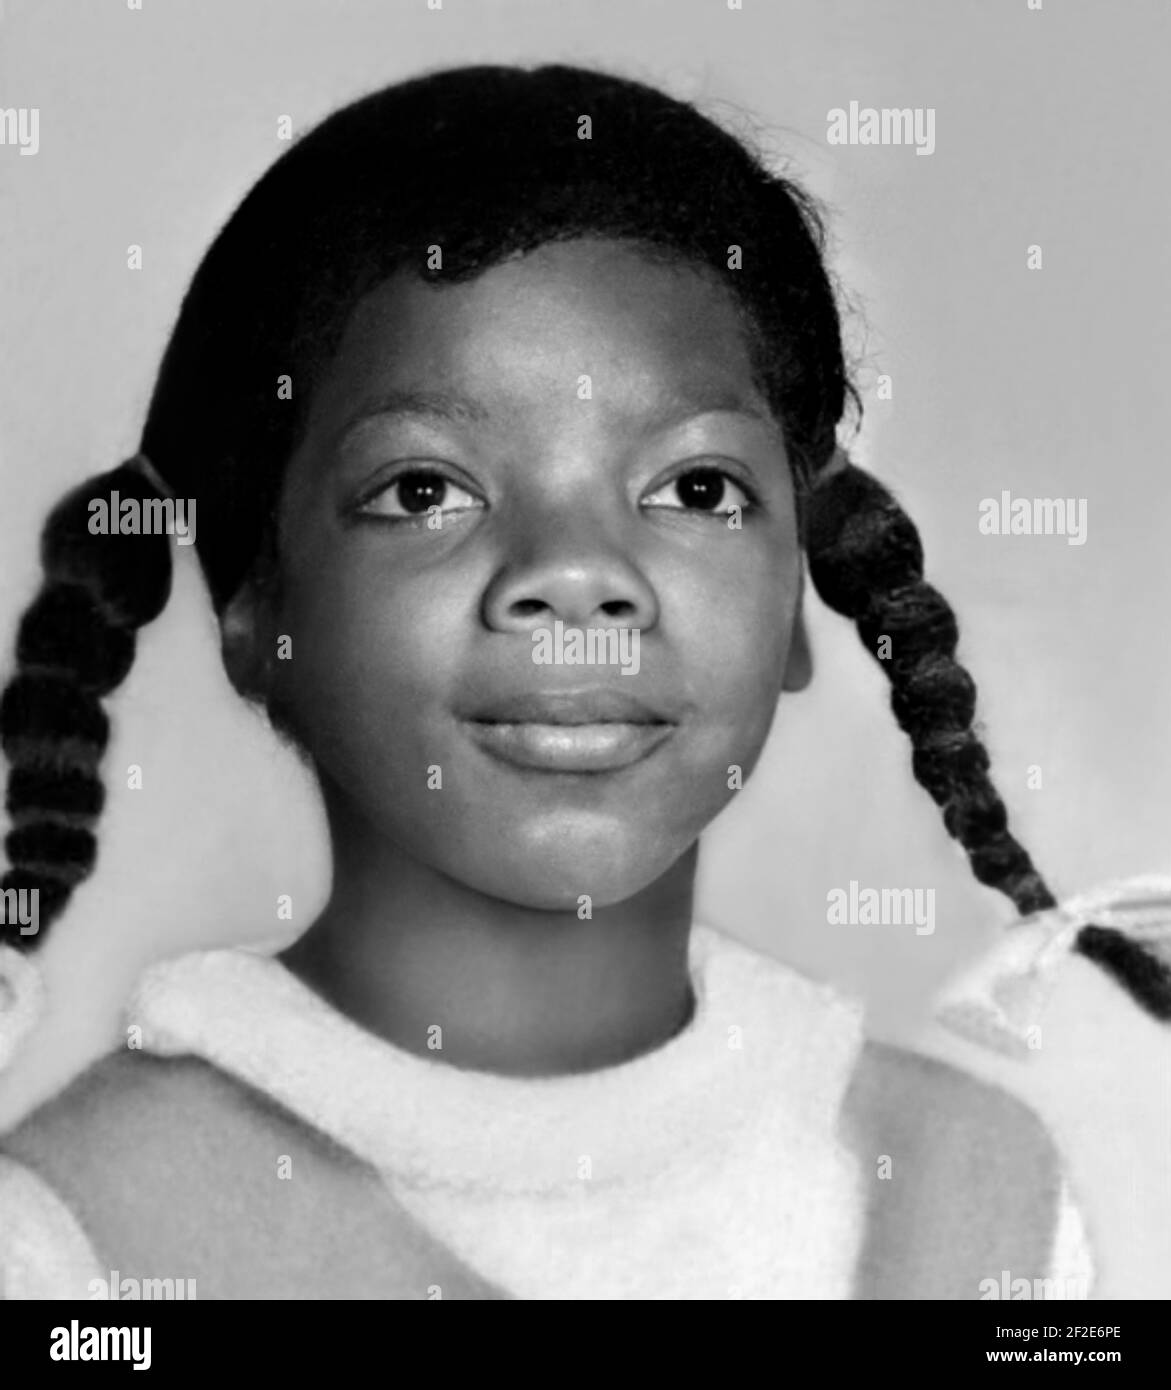 1966 ca , USA : The celebrated American television talk show host, journalist , writer and producer OPRAH WINFREY ( born 29 january 1954 ), when was young aged 12 . Unknown photographer. - HISTORY - FOTO STORICHE - personalità da giovane giovani - personality personalities when was young - PORTRAIT - RITRATTO - GIORNALISTA - JOURNALIST - GIORNALISMO - JOURNALISM - produttore - conduttore televisivo - presentatore - TV - produttore - smile - sorriso - BAMBINA - BAMBINO - BAMBINI - CHILD - CHILDREN - INFANZIA - CHILDHOOD  --- ARCHIVIO GBB Stock Photo